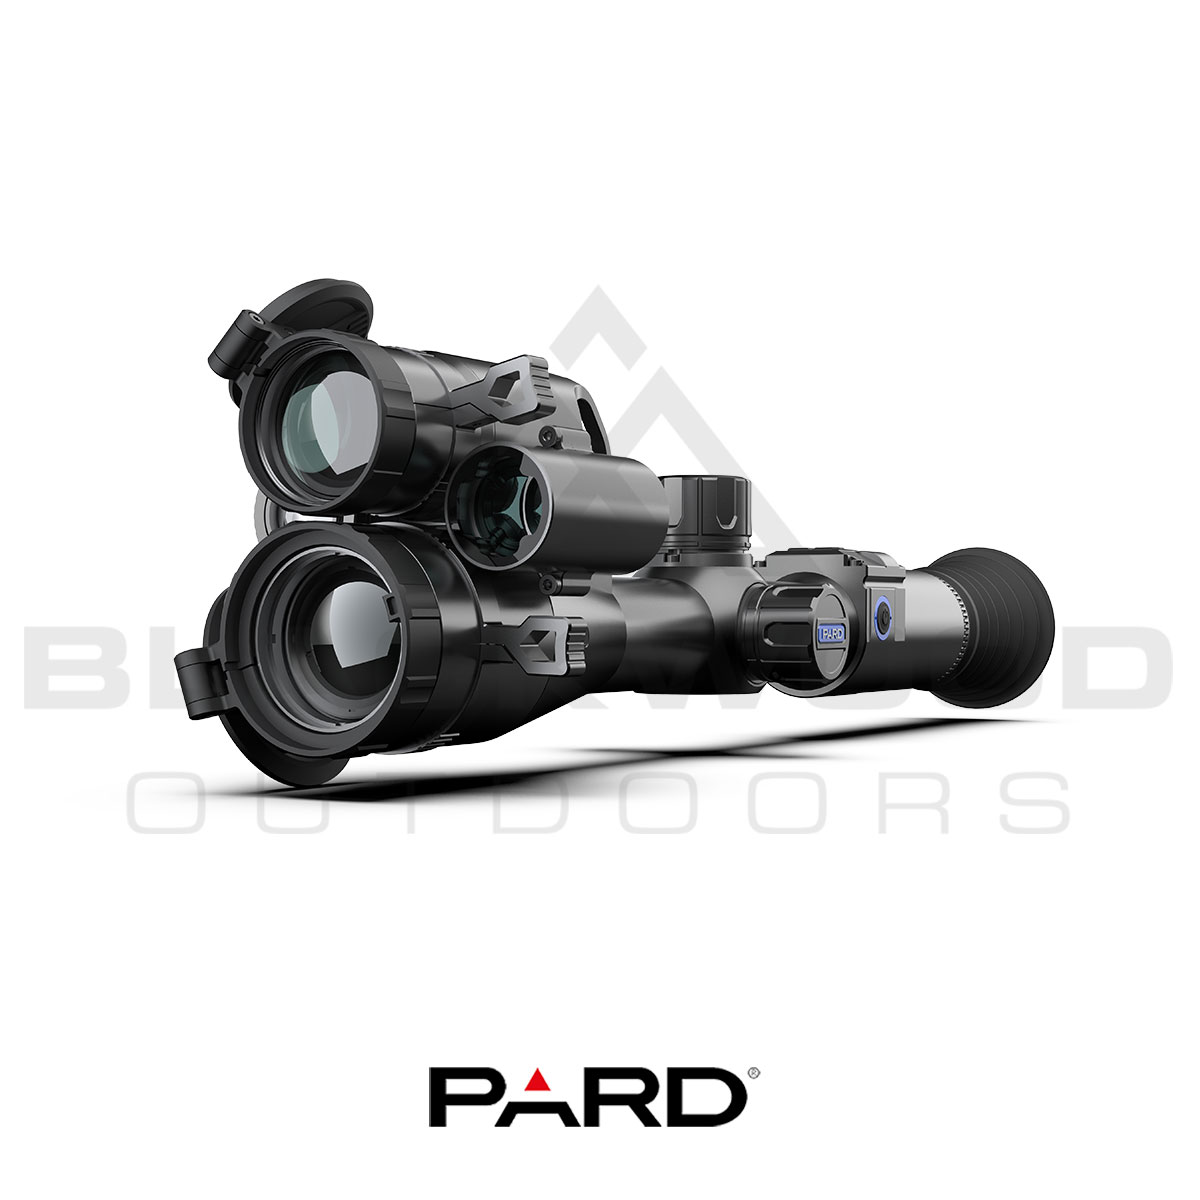 Pard TD5 Thermal and Night Vision LRF Scope